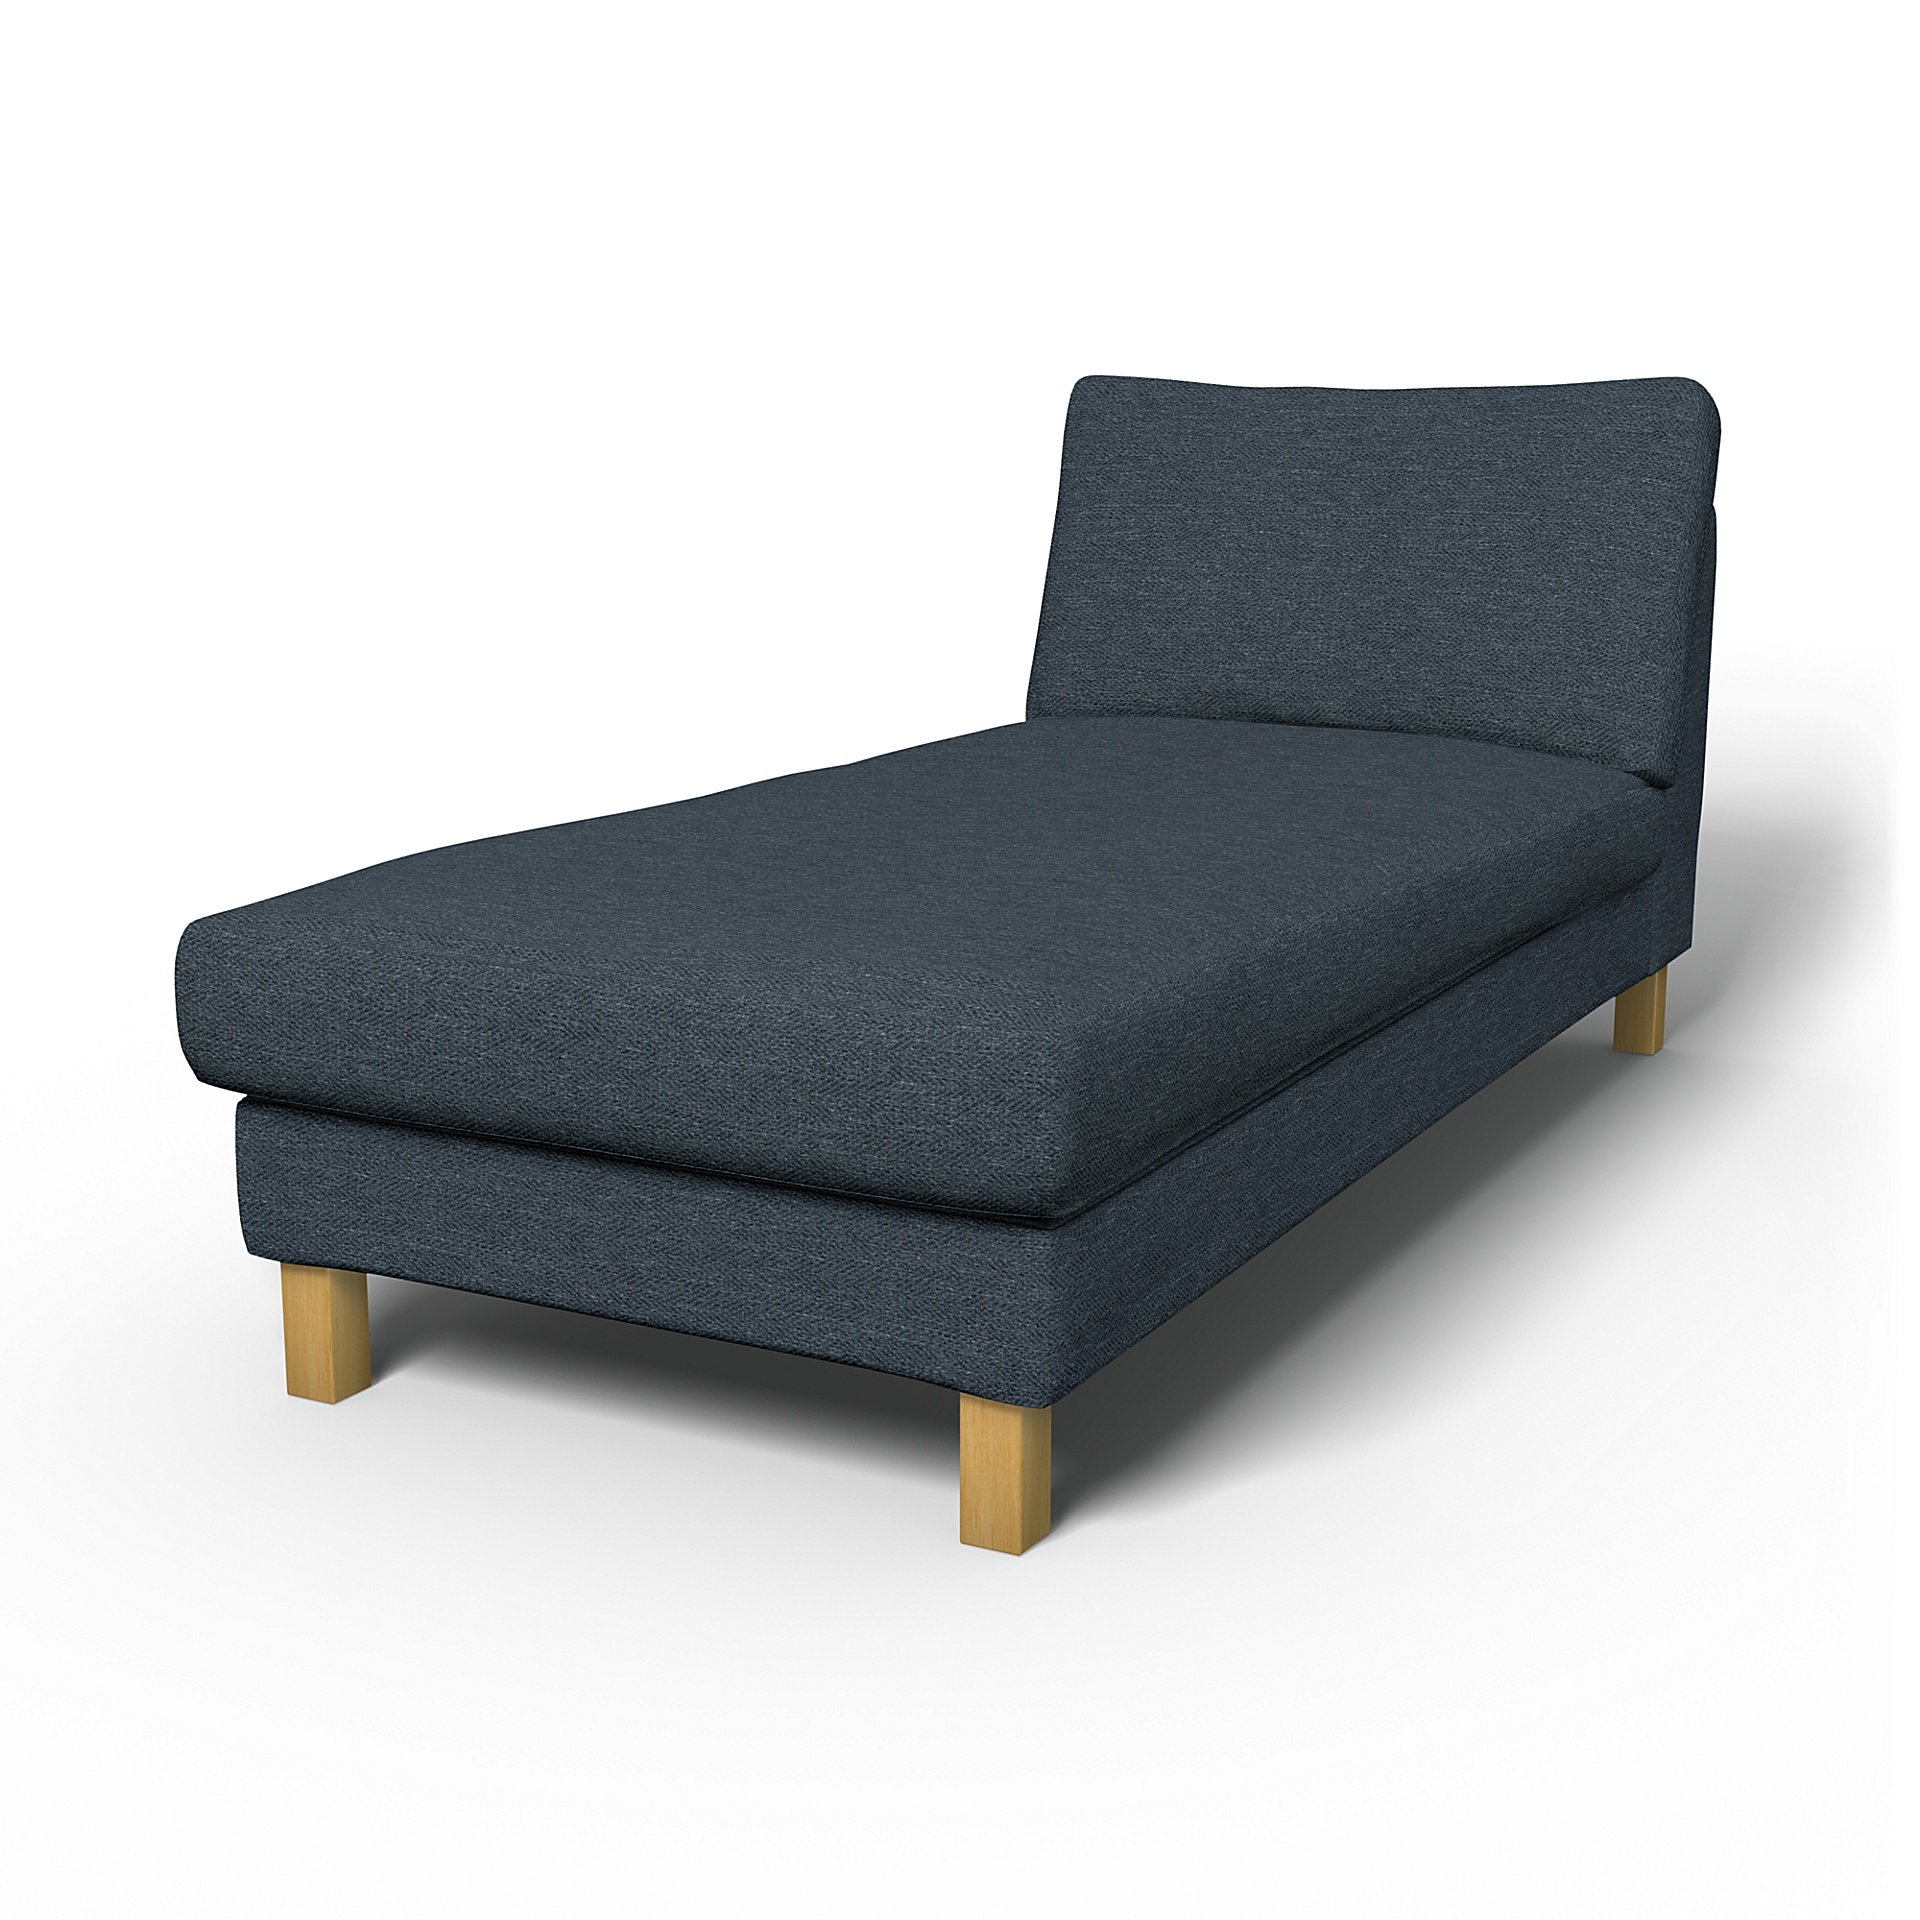 IKEA - Karlstad Stand Alone Chaise Longue Cover, Denim, Boucle & Texture - Bemz